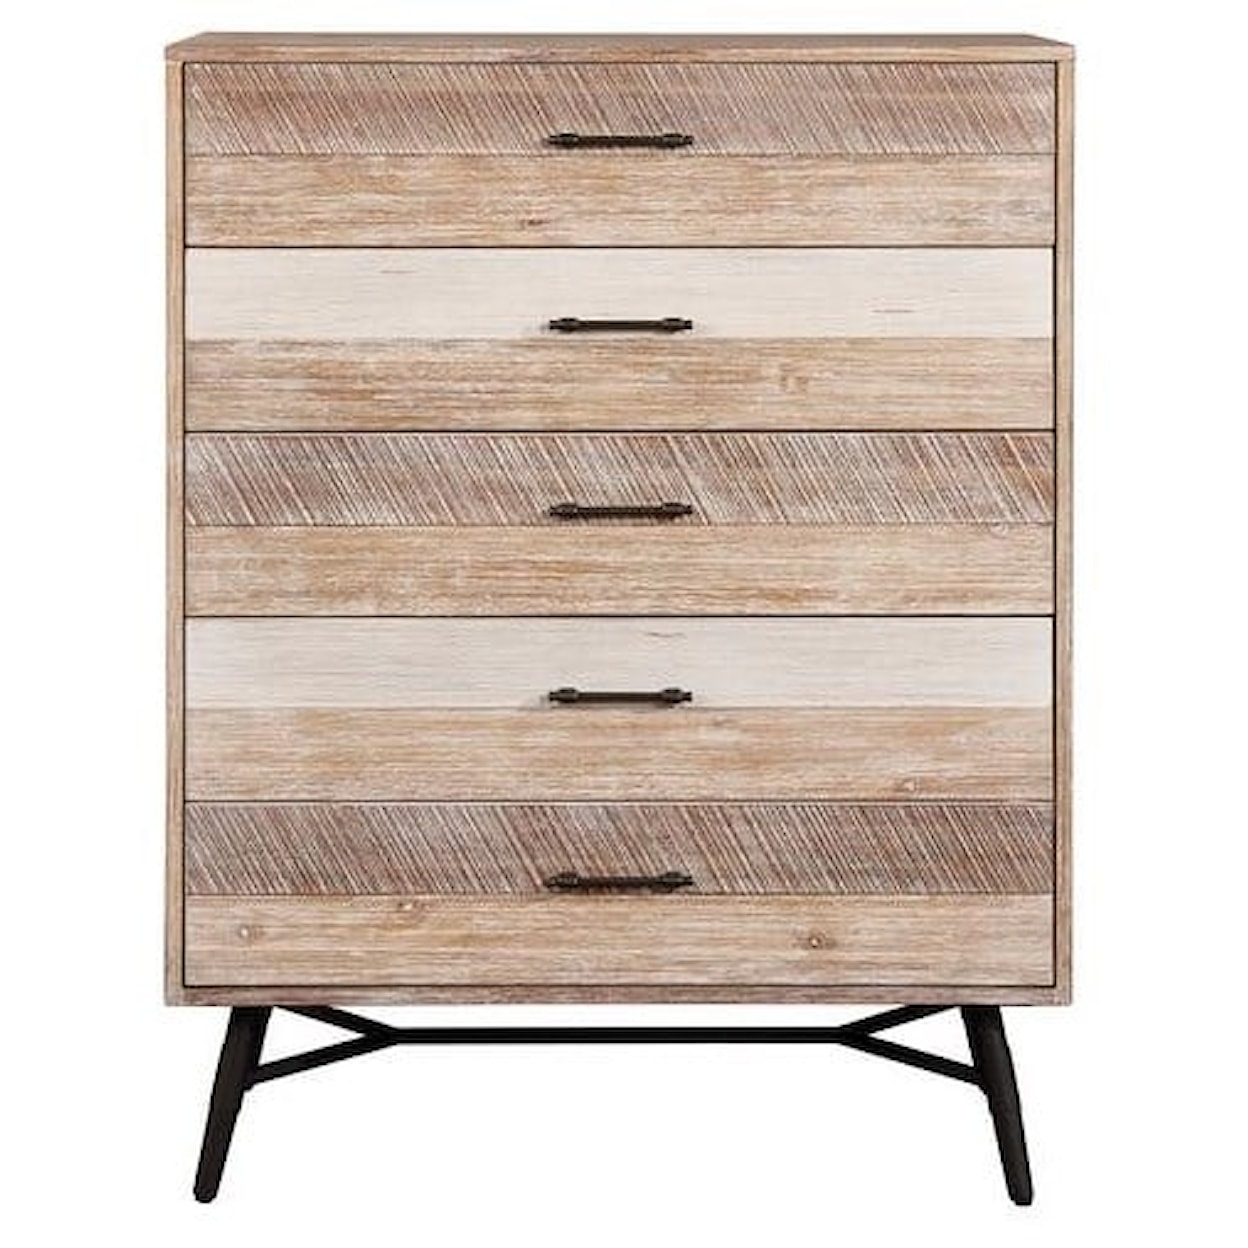 Coaster Marlow 21576 Bedroom 5 Drawer Chest